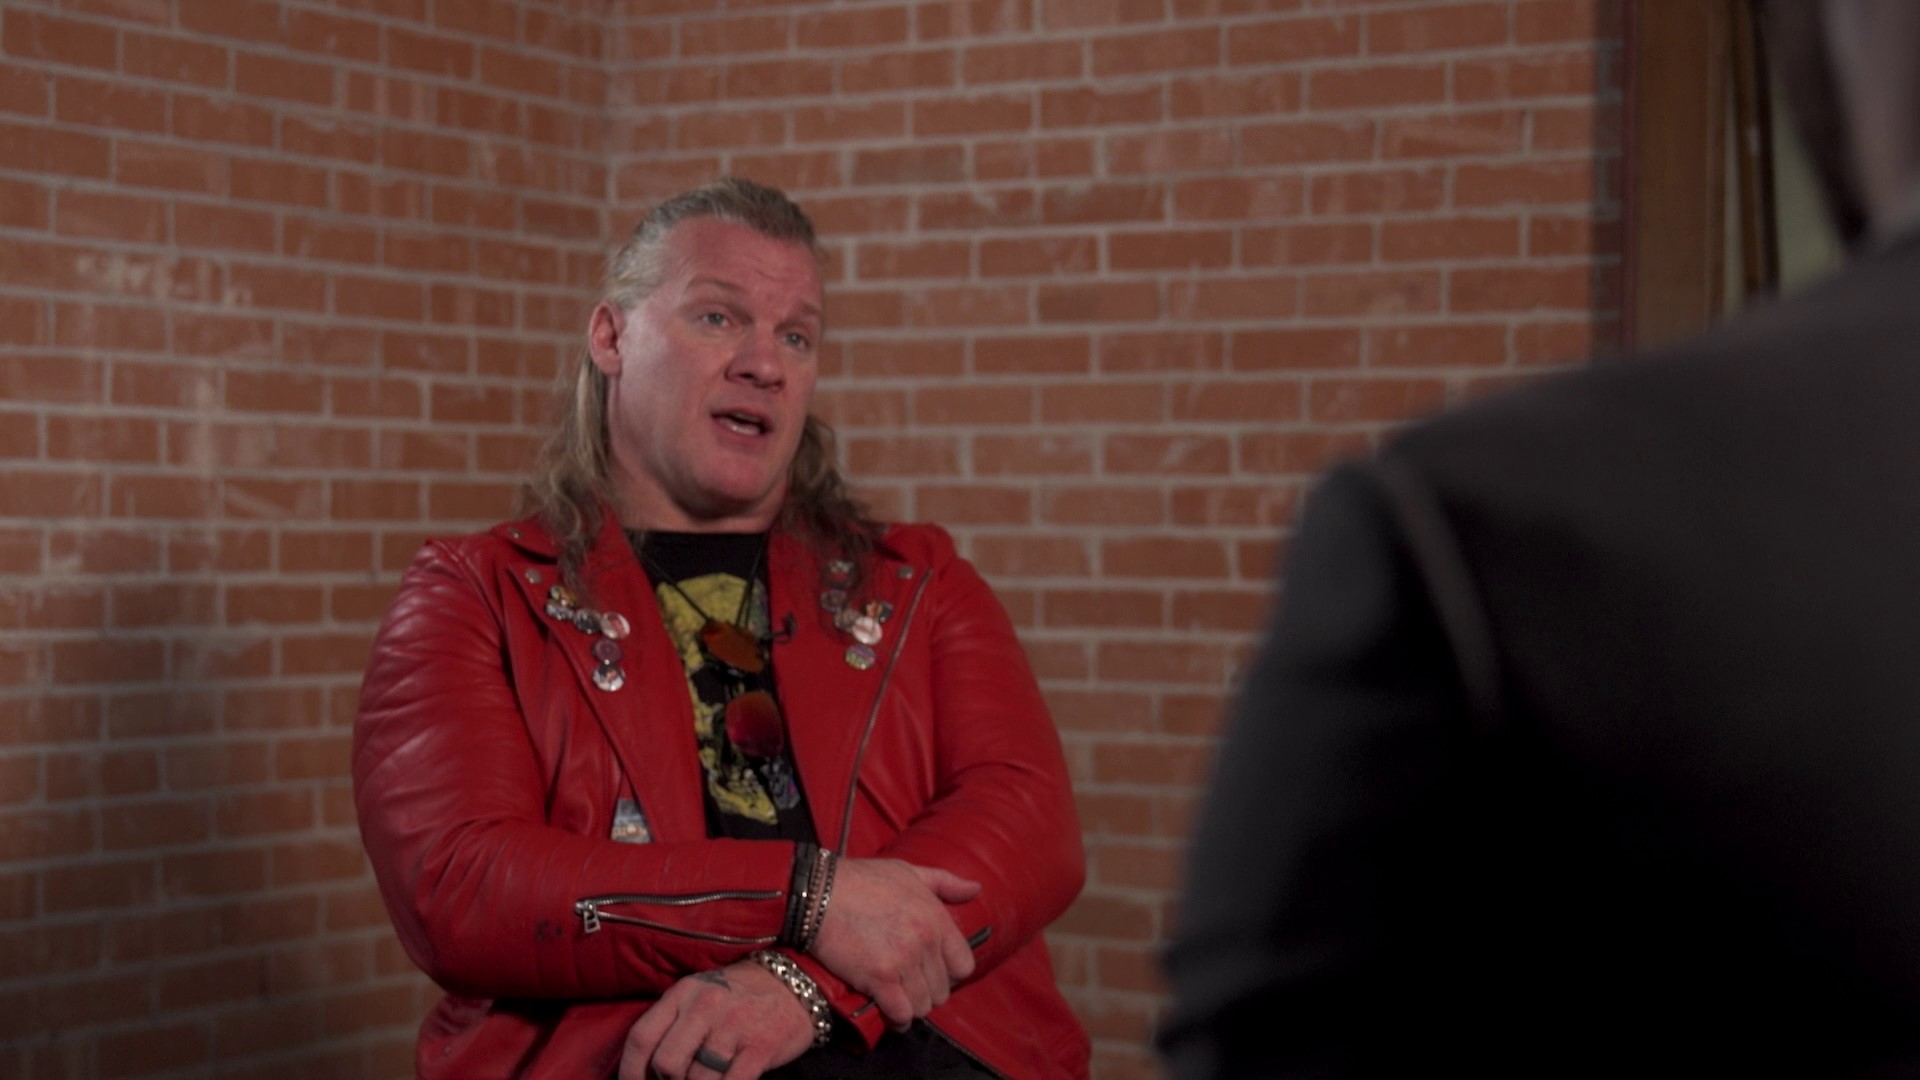 Chris Jericho talks about AEW's shows in Dallas this week and other parts of the wrestling industry.